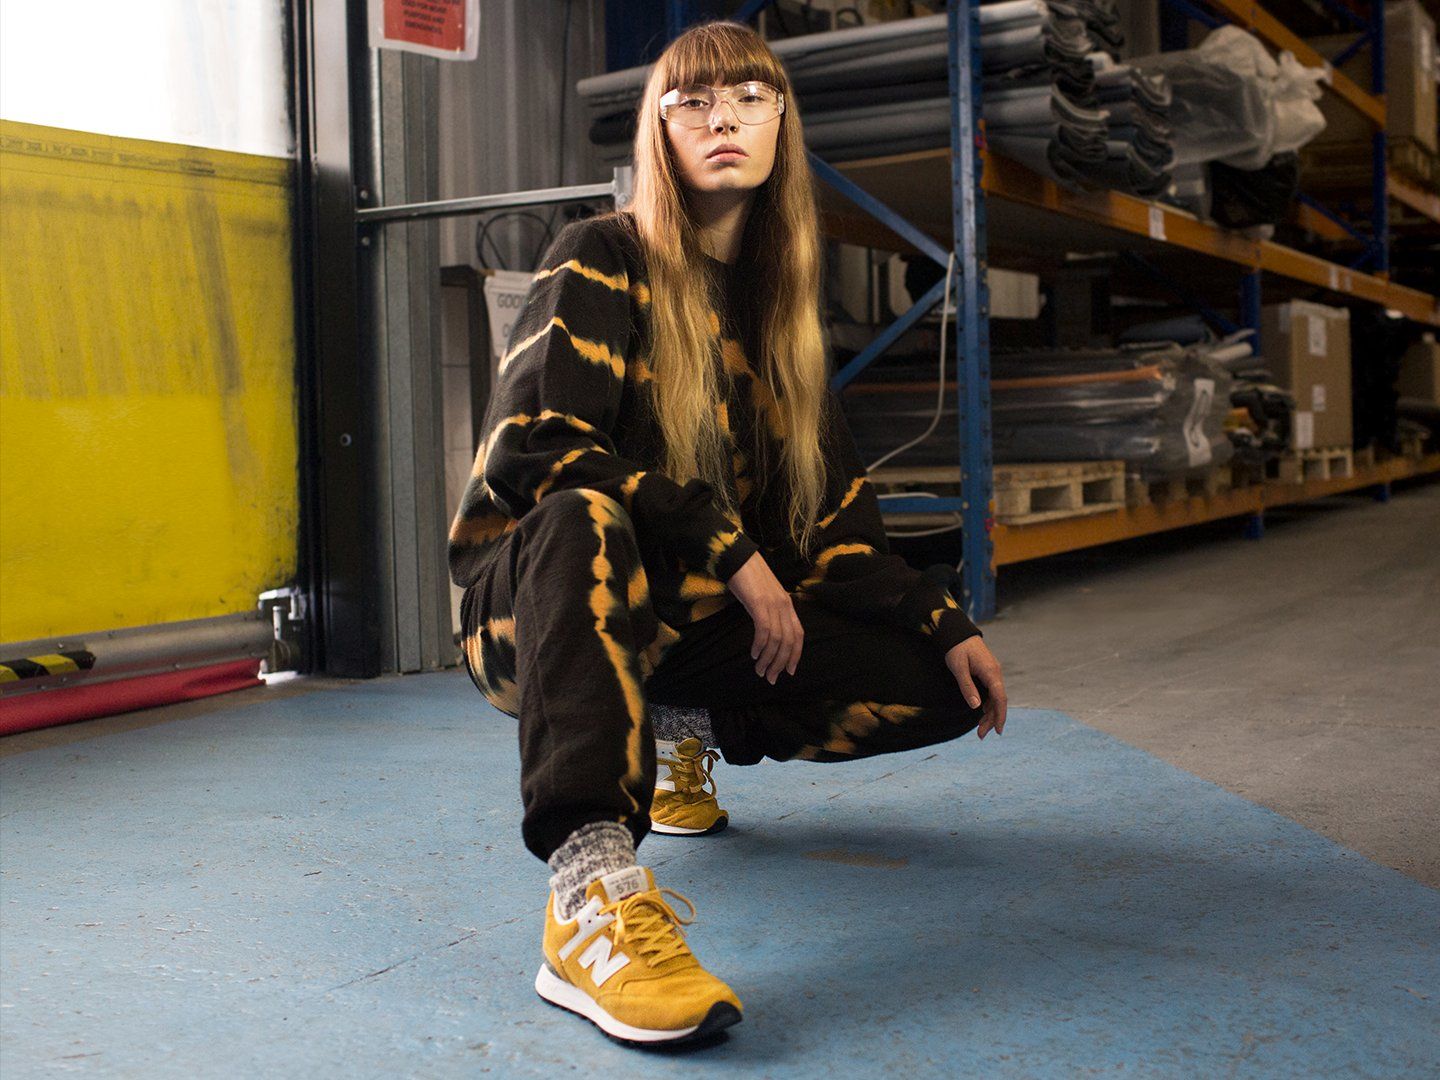 A woman crouching down in a warehouse wearing a black and yellow tie-dye sweat suit and yellow New Balance sneakers - New Balance